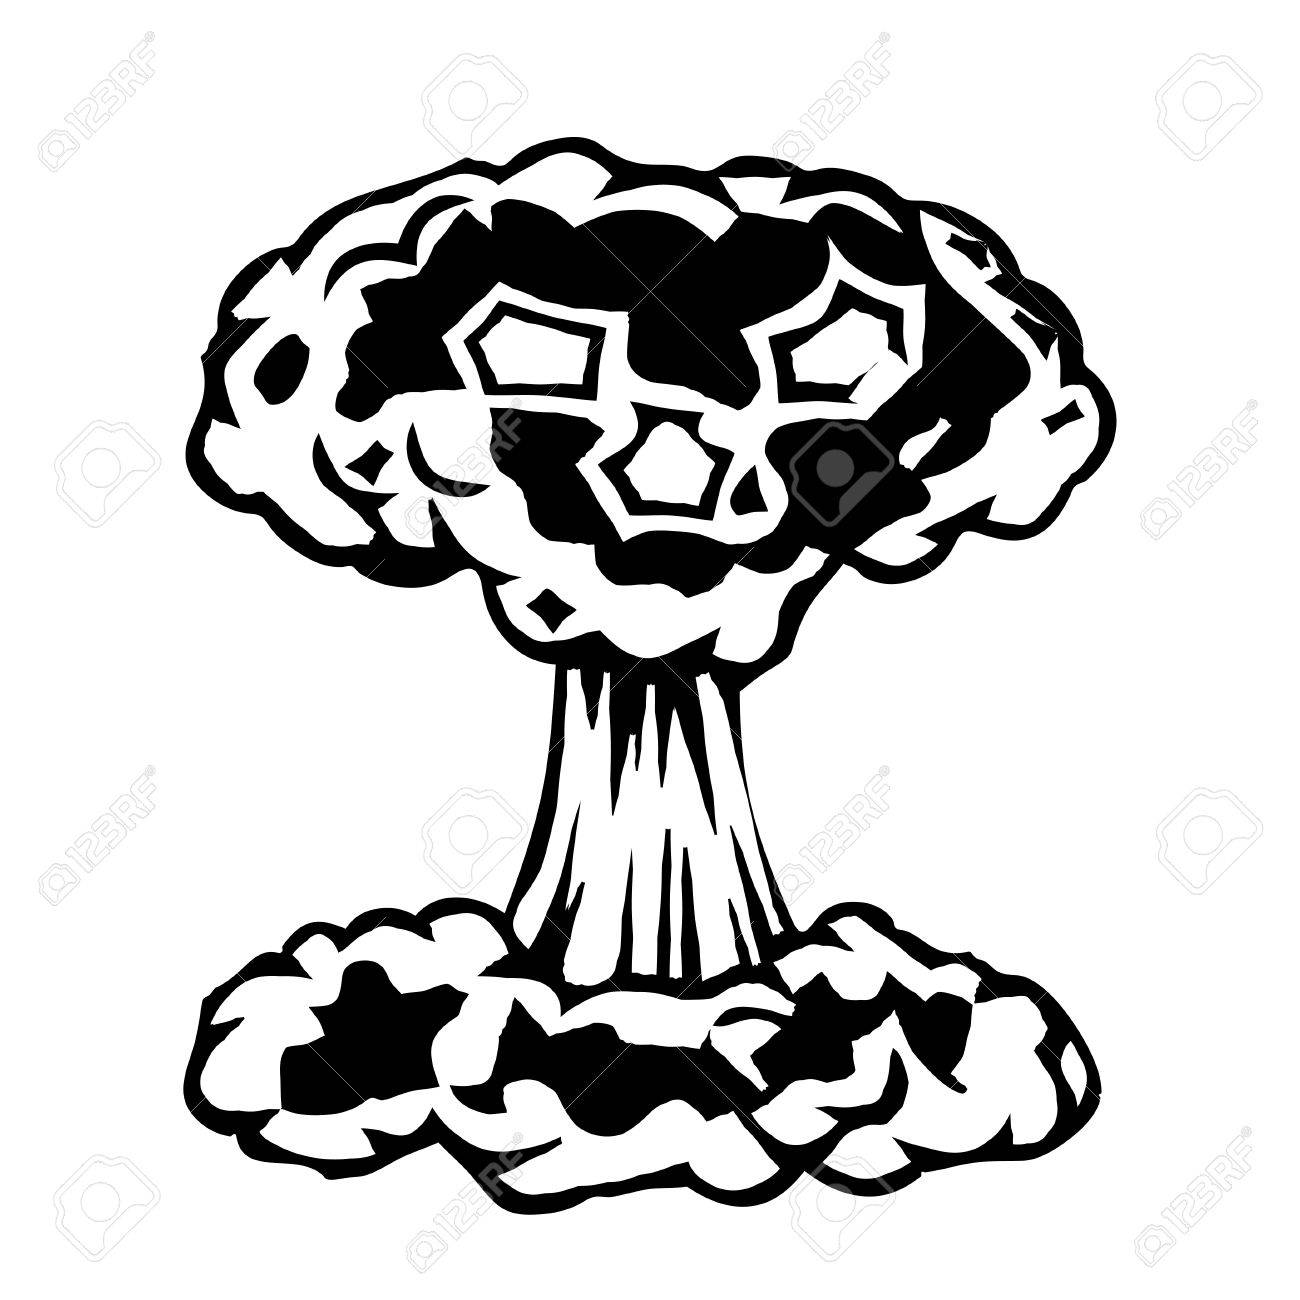 Nuke Drawing How To Draw A Nuke, Nuclear Blast, Step By Step, Other